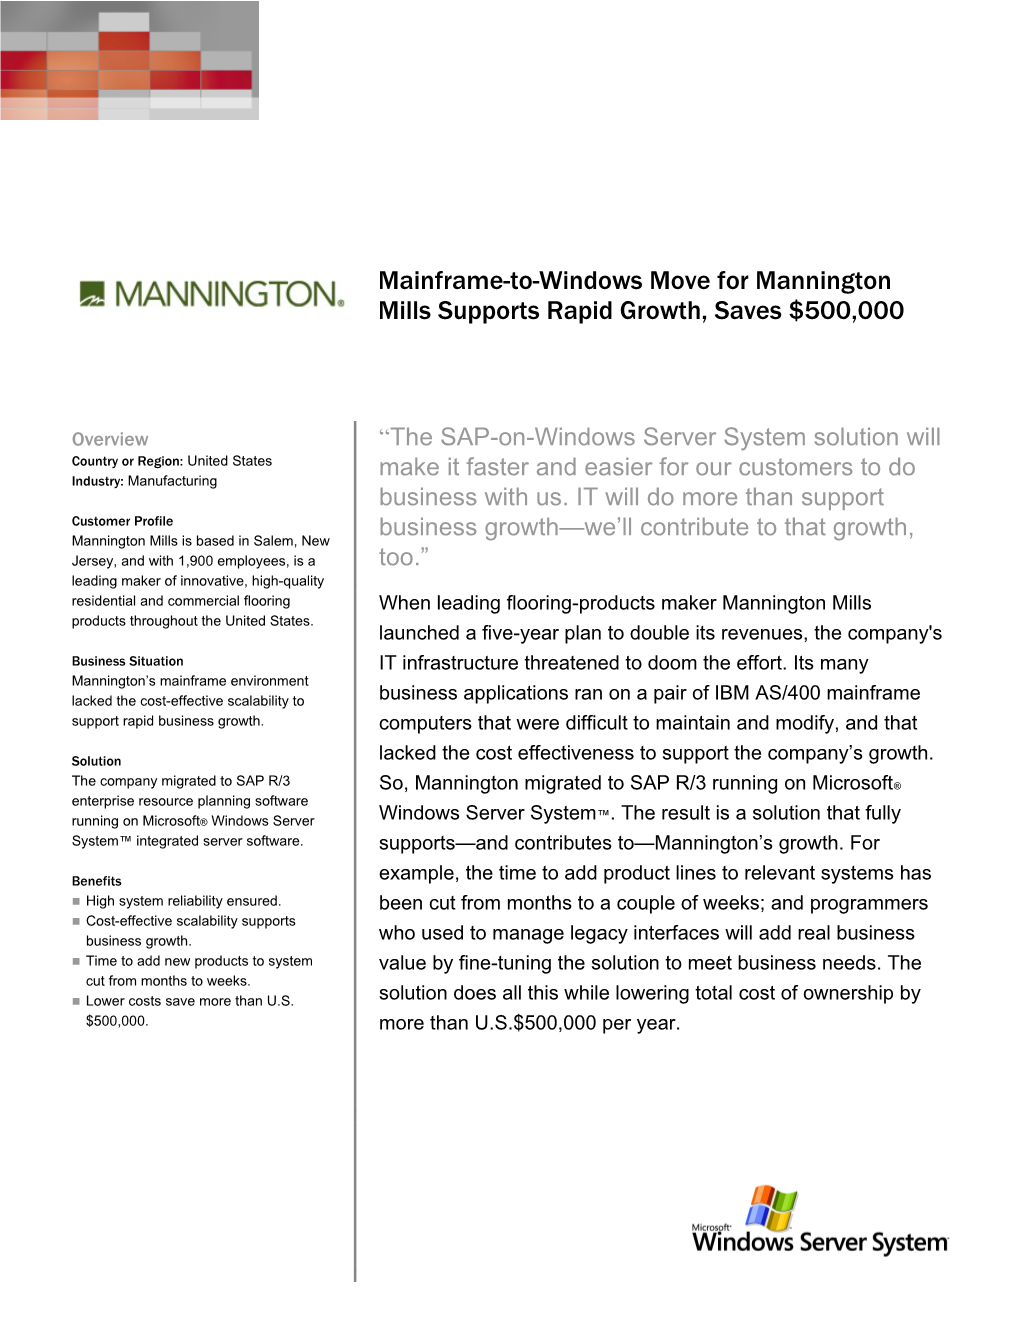 Mainframe-To-Windows Move for Mannington Mills Supports Rapid Growth, Saves $500,000